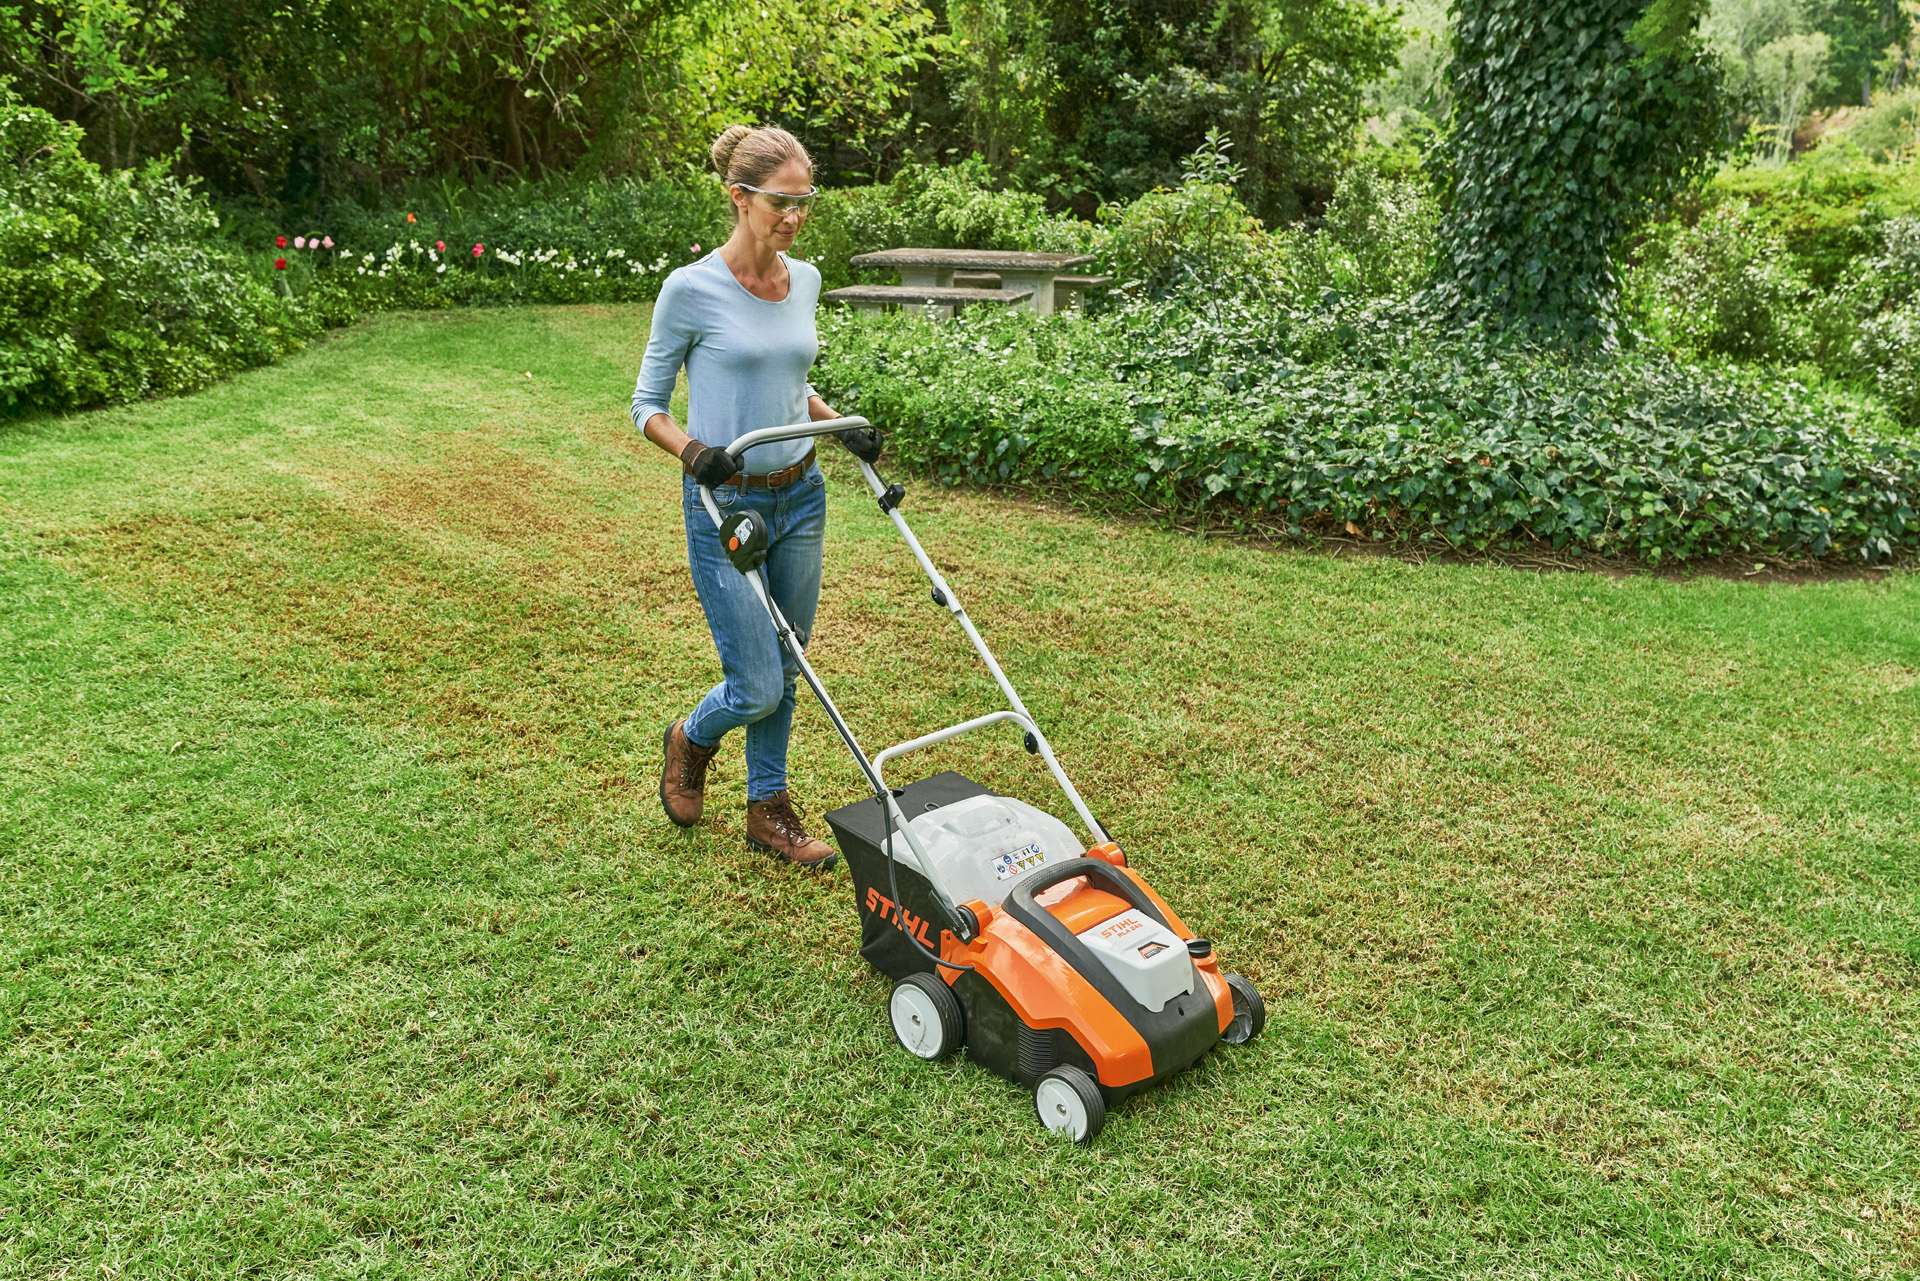 Stihl scarifiers - now's the time!